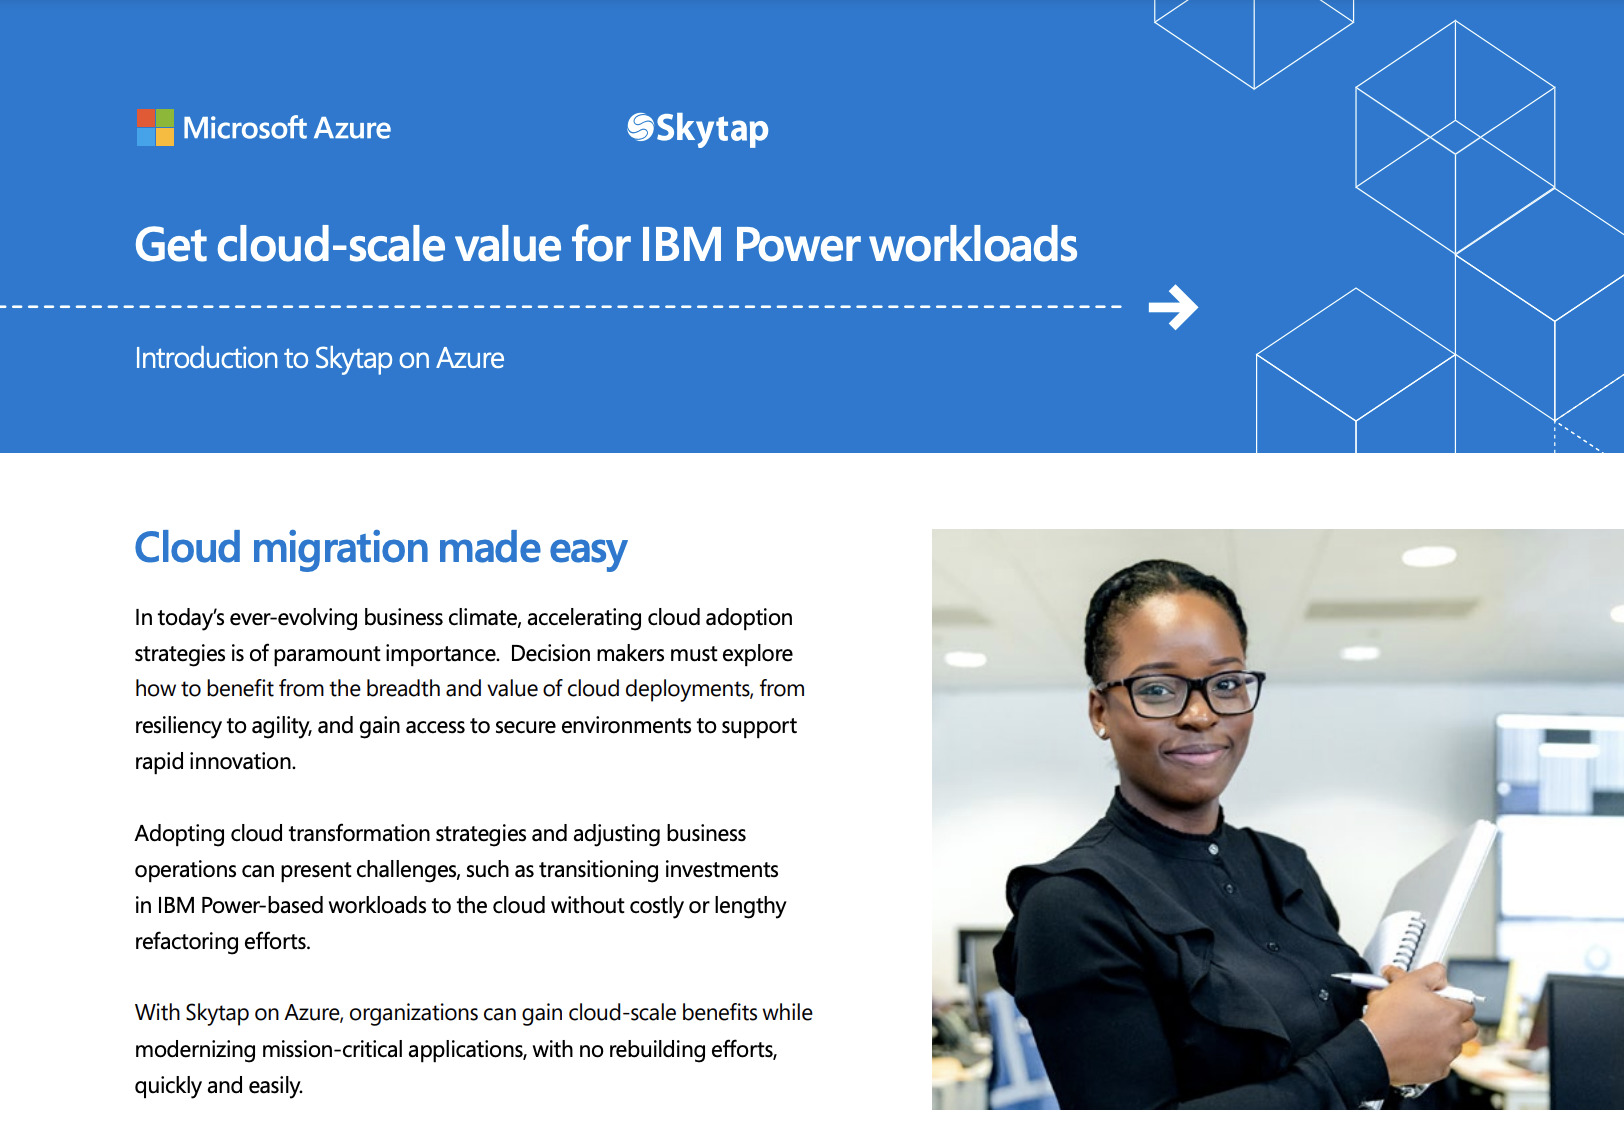 Get cloud-scale value for IBM Power workloads